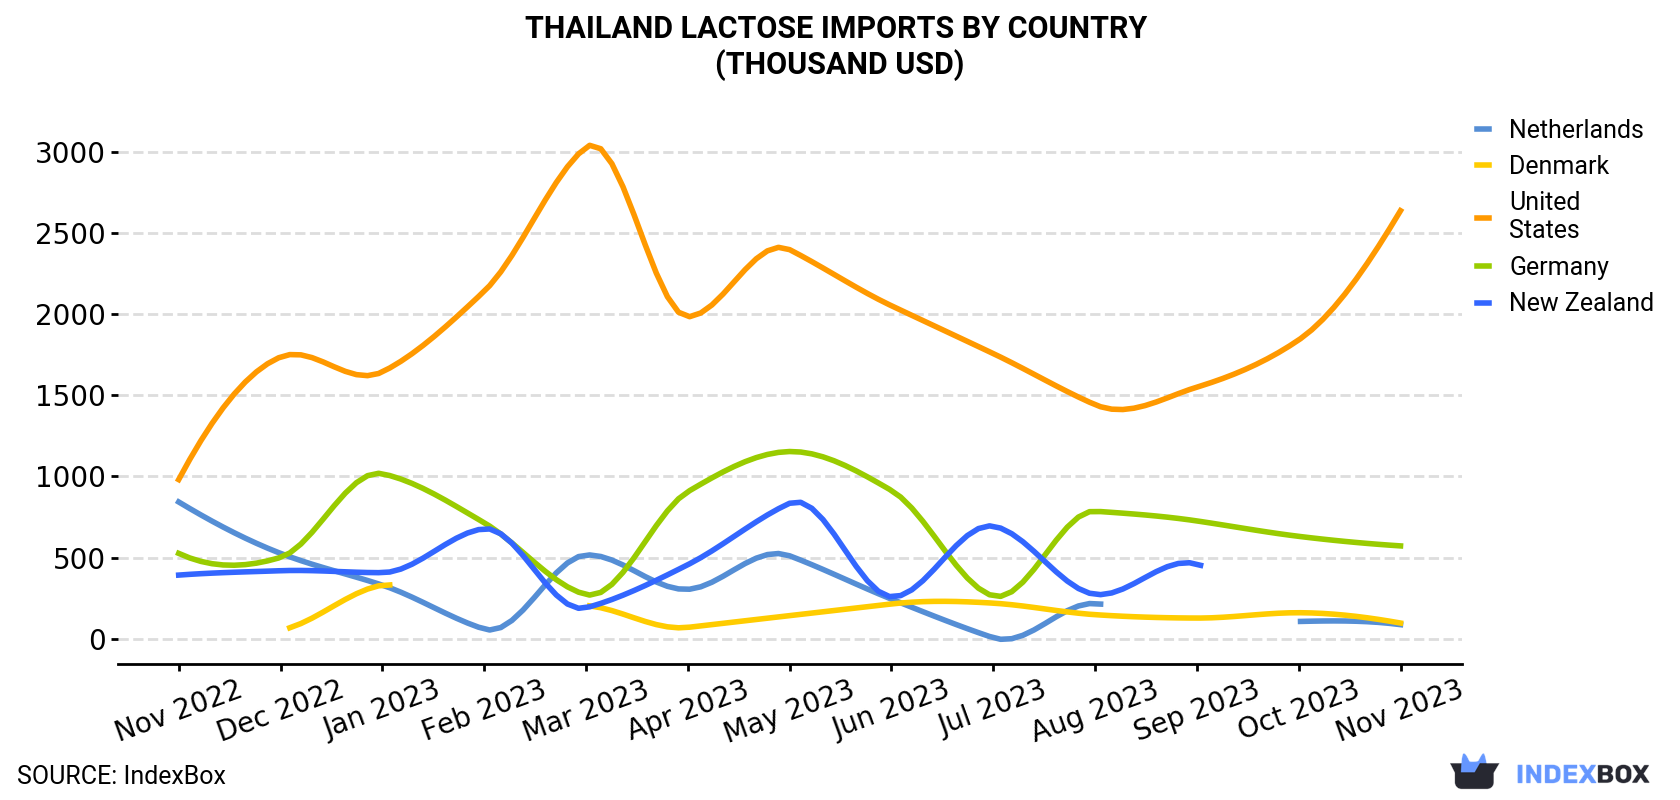 Thailand Lactose Imports By Country (Thousand USD)